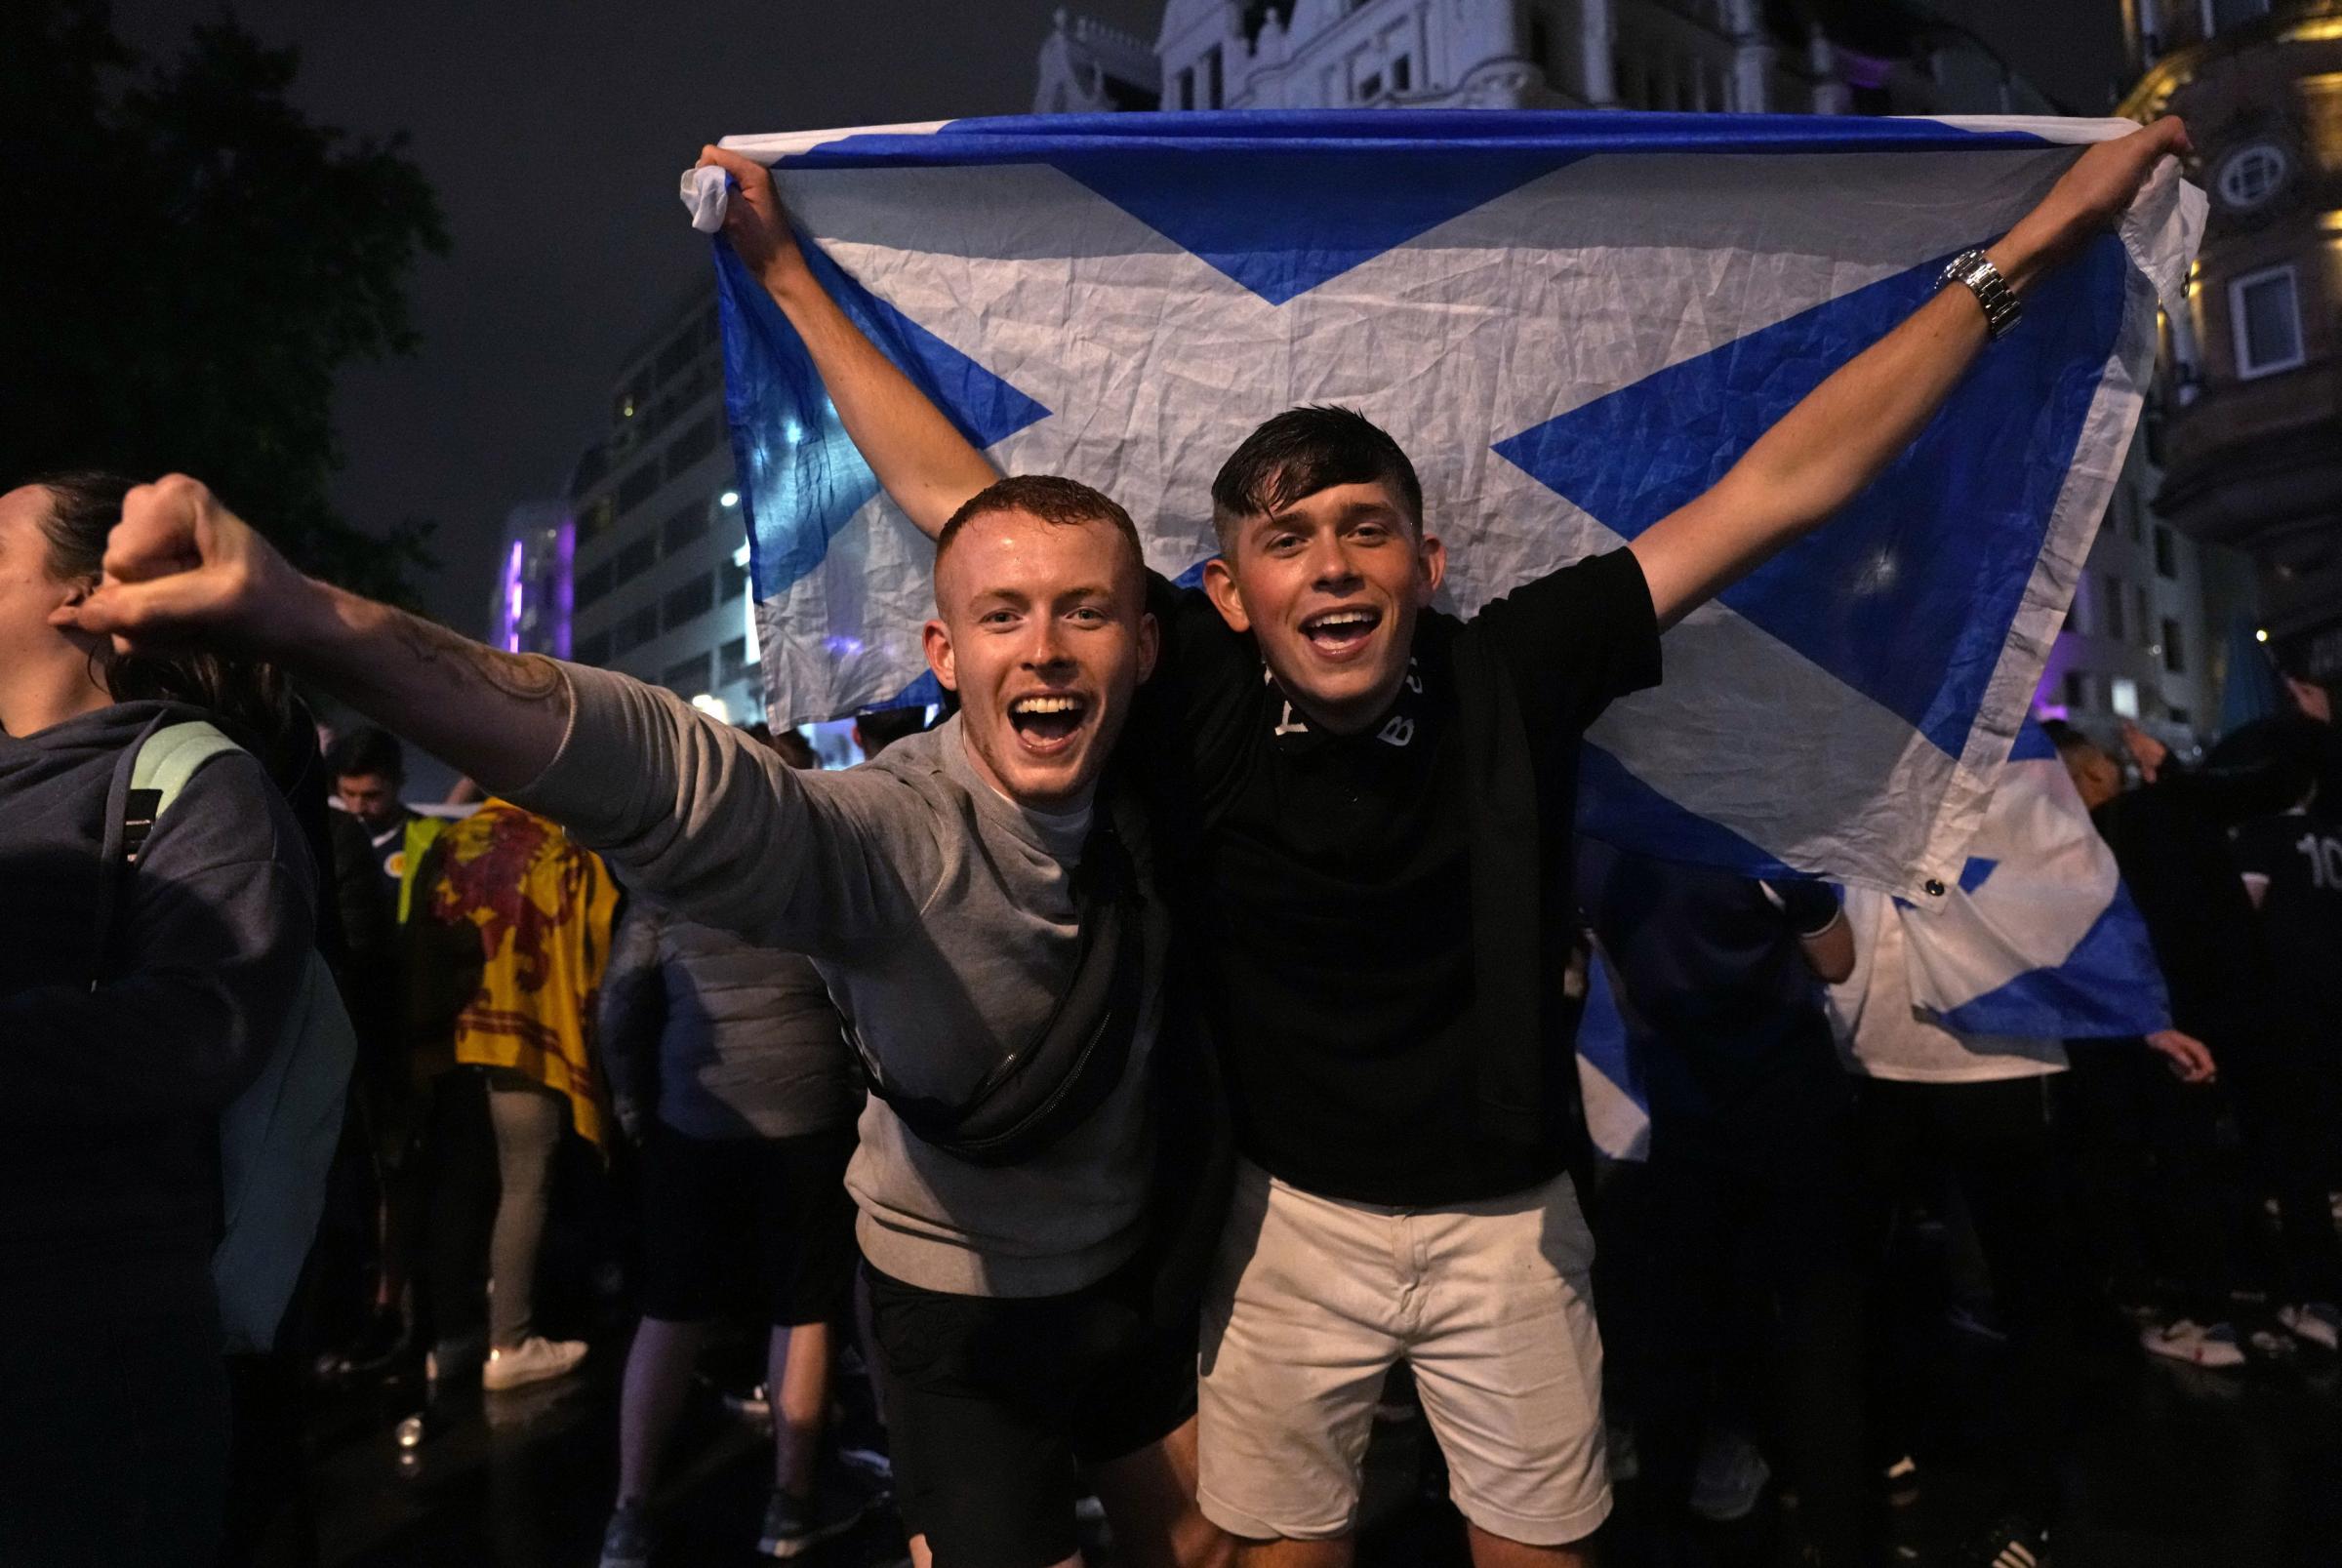 Scotland supporters react in Leicester Square in London, Friday, June 18, 2021 after the Euro 2020 soccer championship group D match between England and Scotland at Wembley Stadium. The match ended in a 0-0 draw. (AP Photo/Kirsty Wigglesworth).